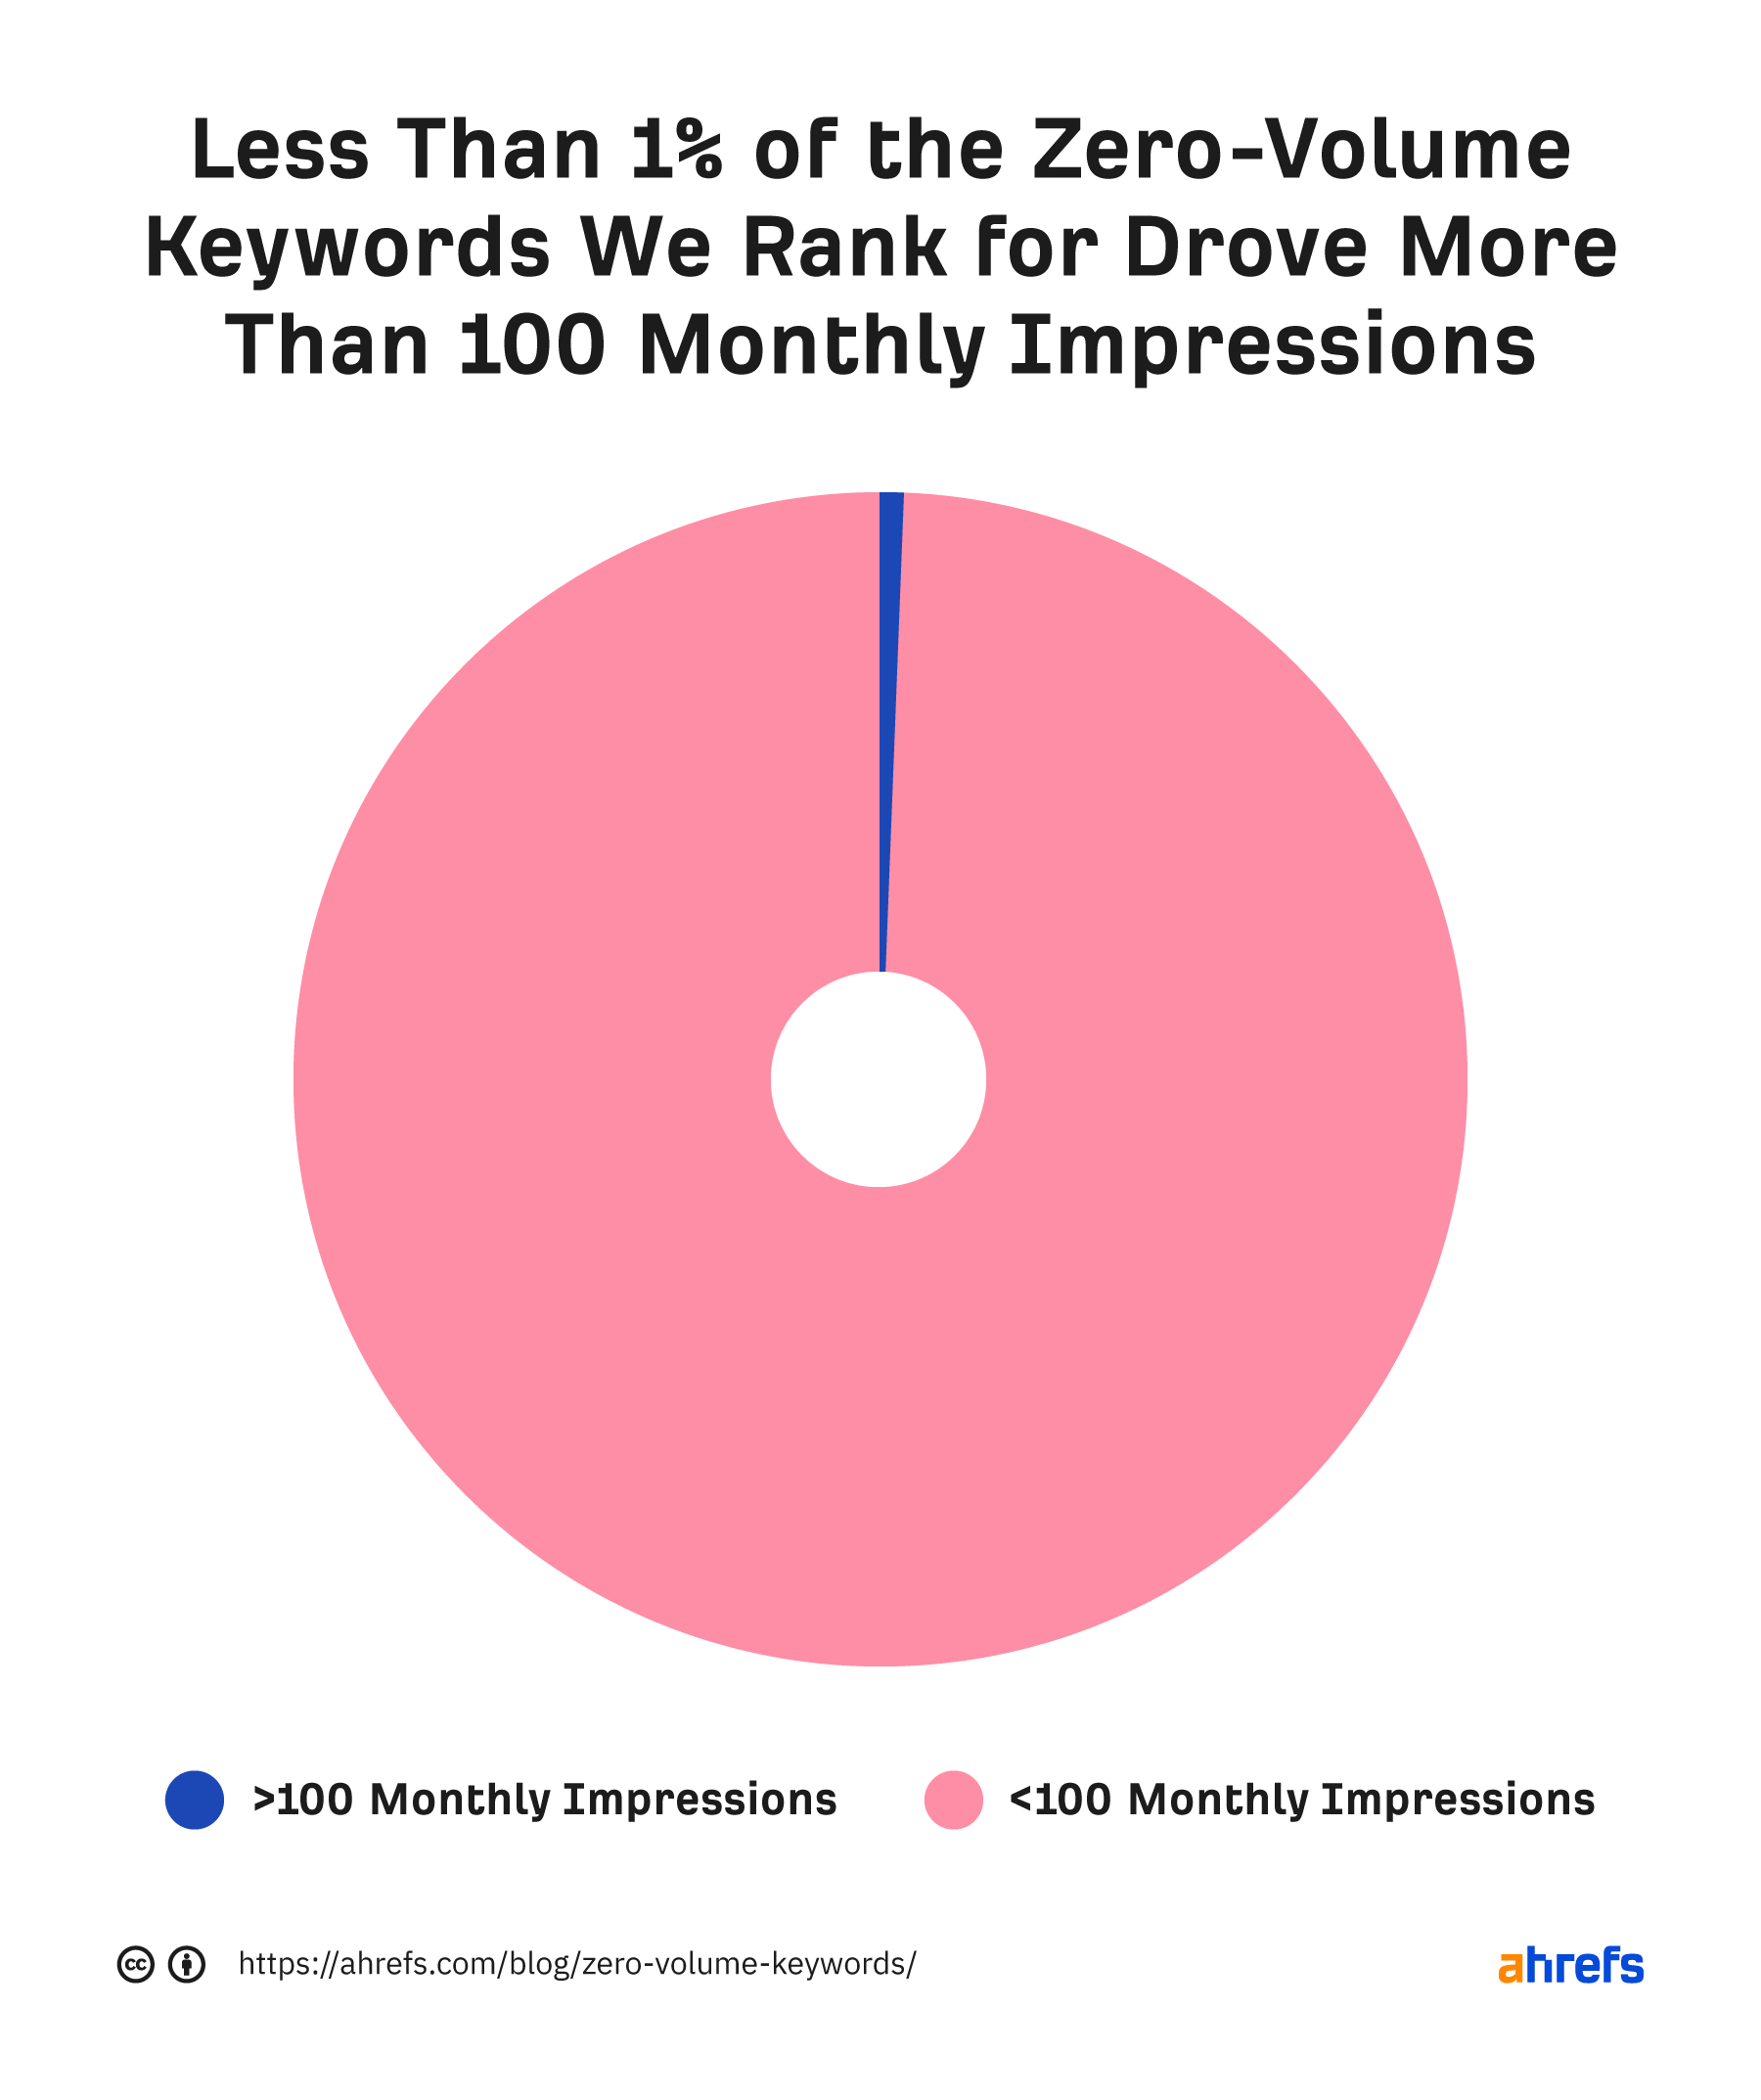 Very few zero-volume keywords drive more than 100 monthly impressions